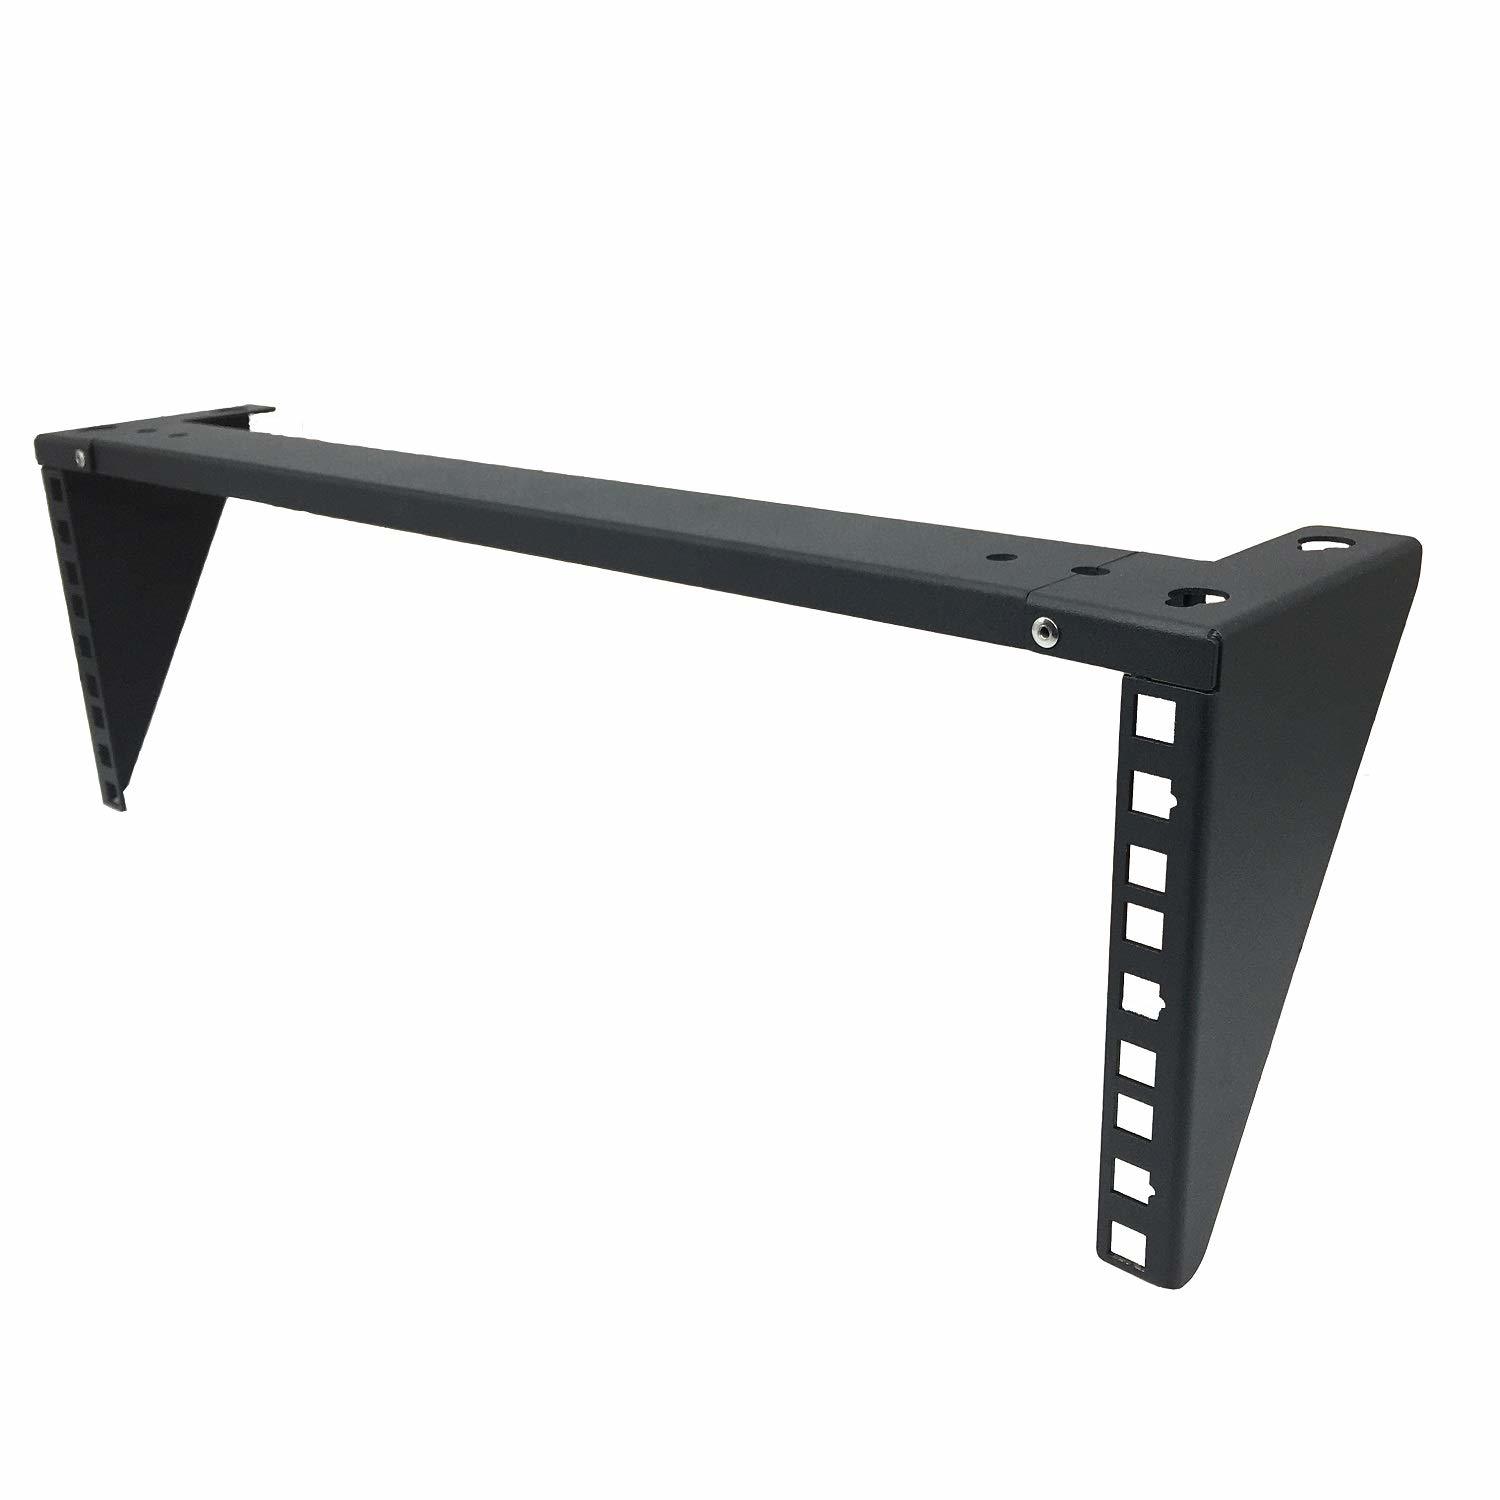 Primary image for 3U Lightweight Foldable Wall Mount Patch Panel Bracket - 19 Inch Steel Vertical 